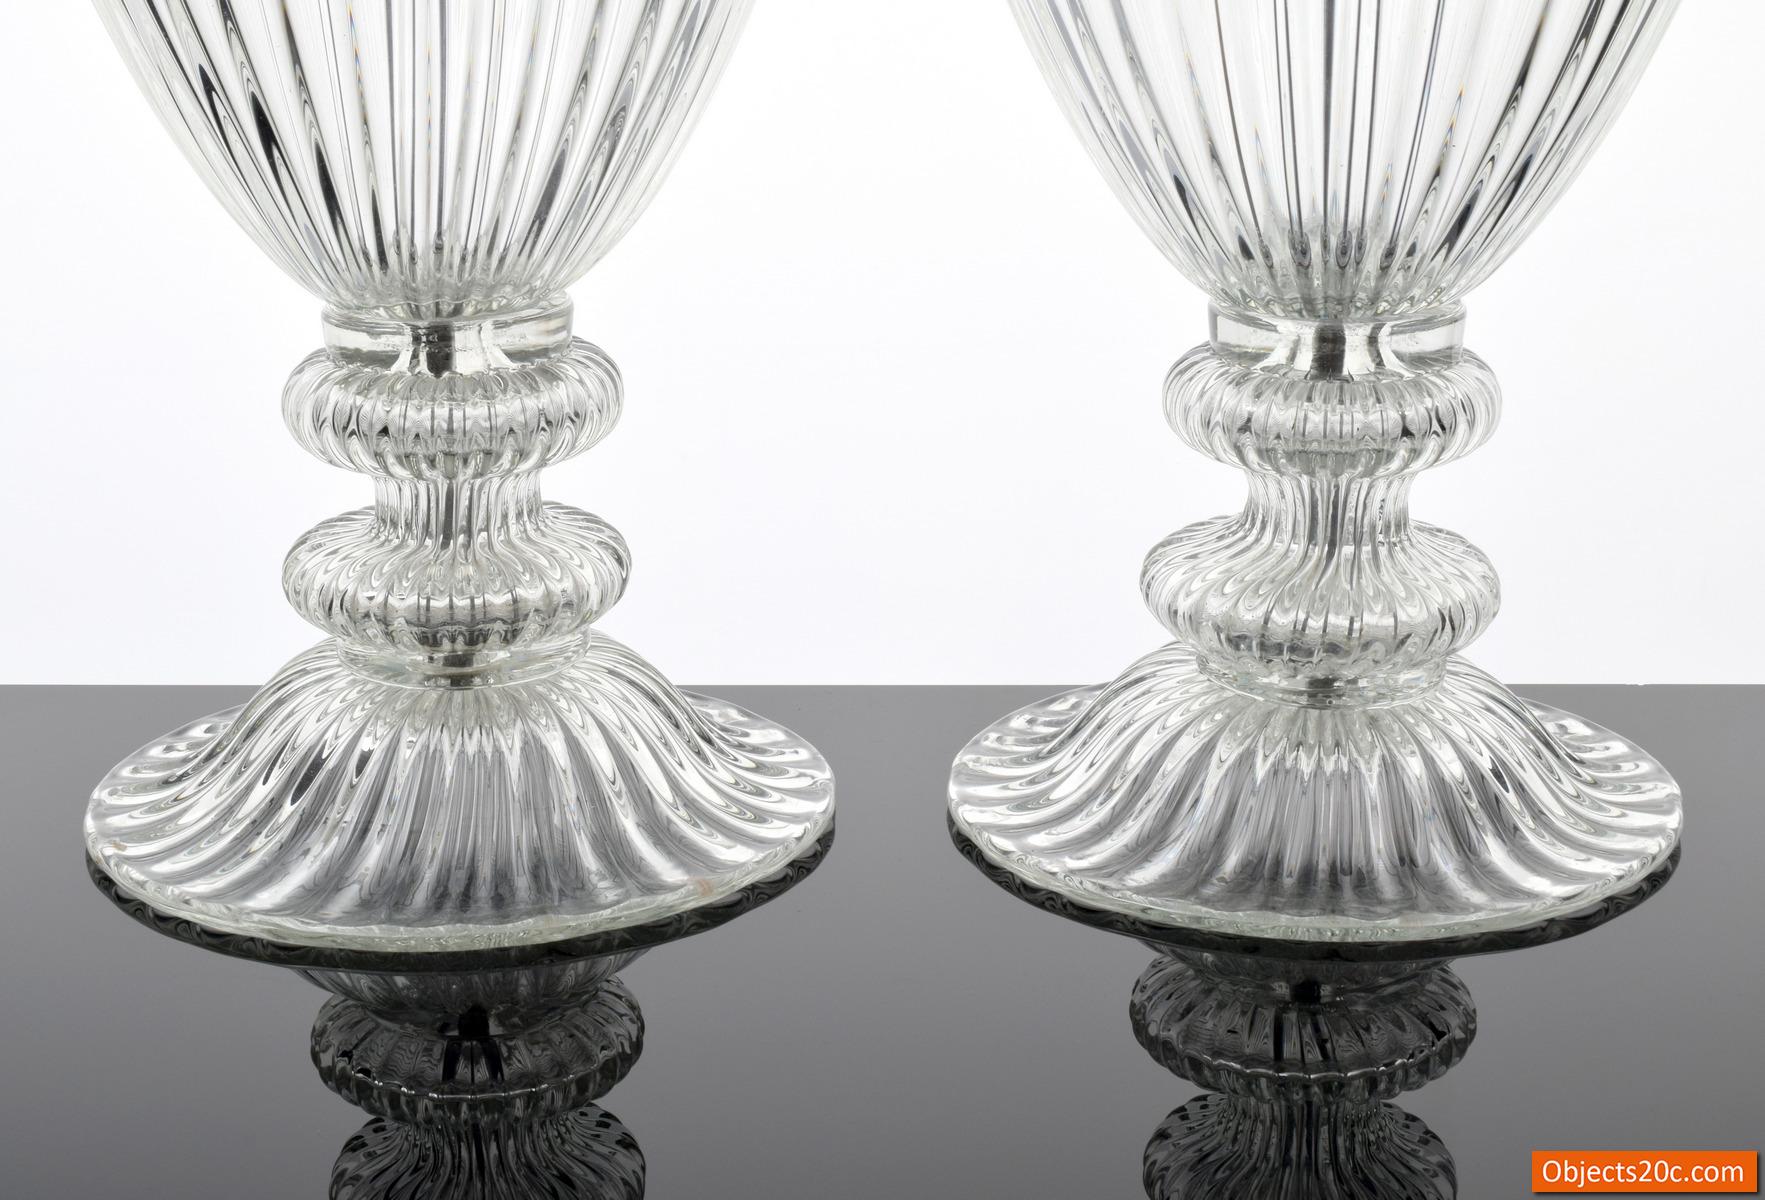 Pair of large ribbed blown glass lamps in the manner of Barovier & Toso, Murano, Italy.